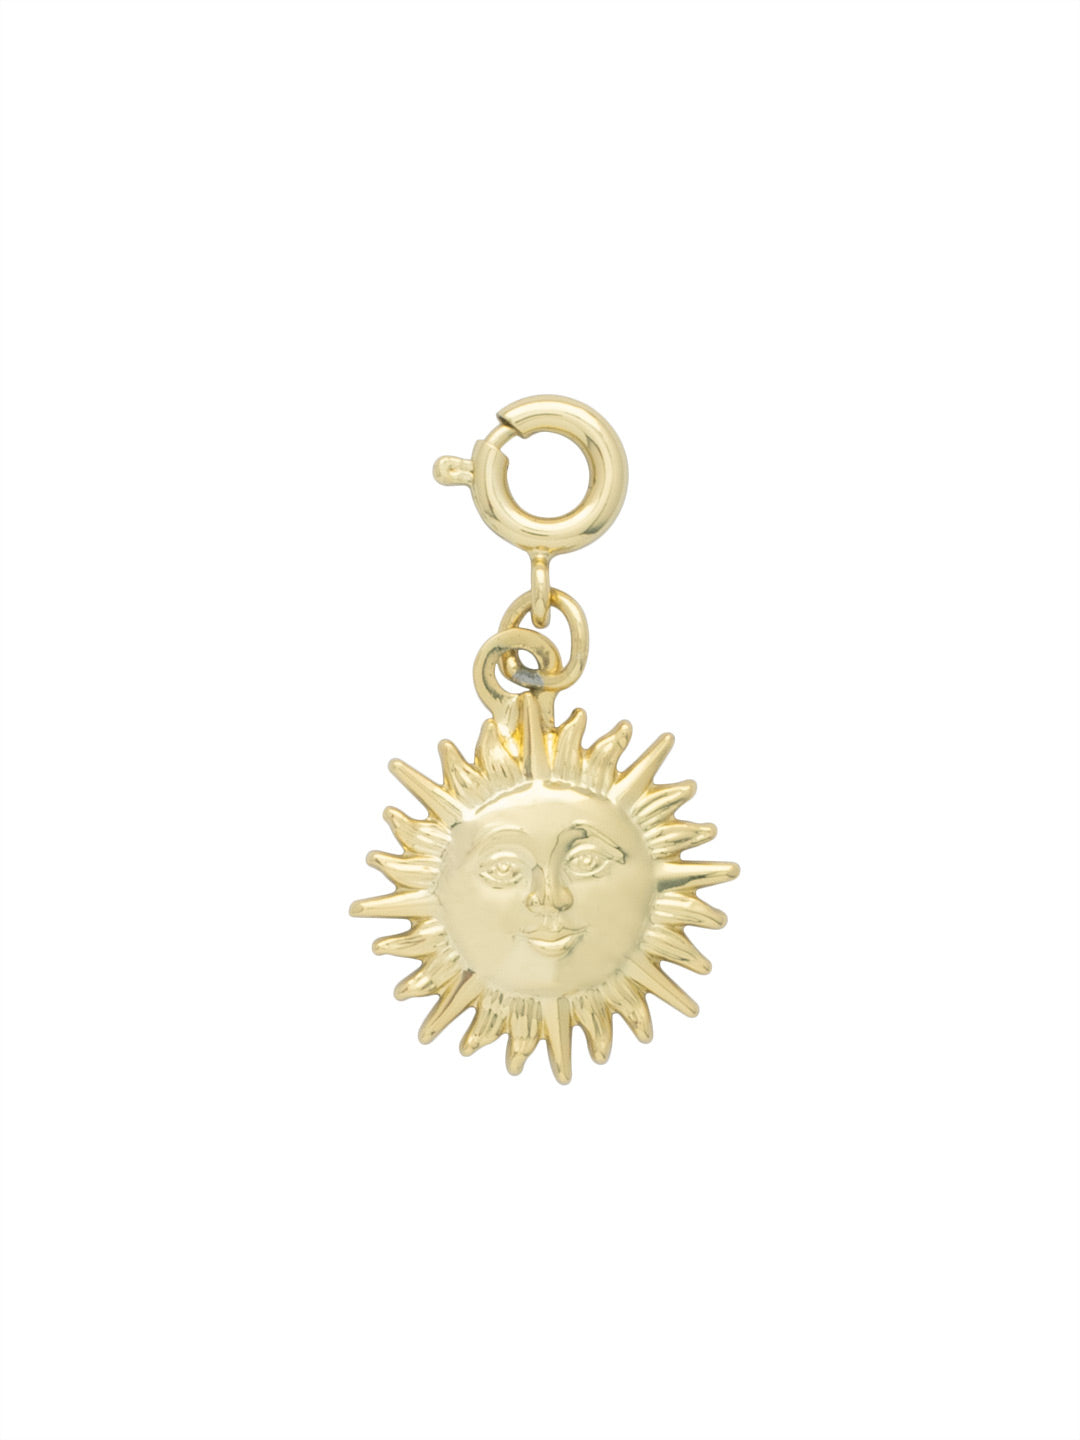 Sun Charm - CFG25BGMTL - <p>Metal sun charm with a spring ring clasp. From Sorrelli's Bare Metallic collection in our Bright Gold-tone finish.</p>